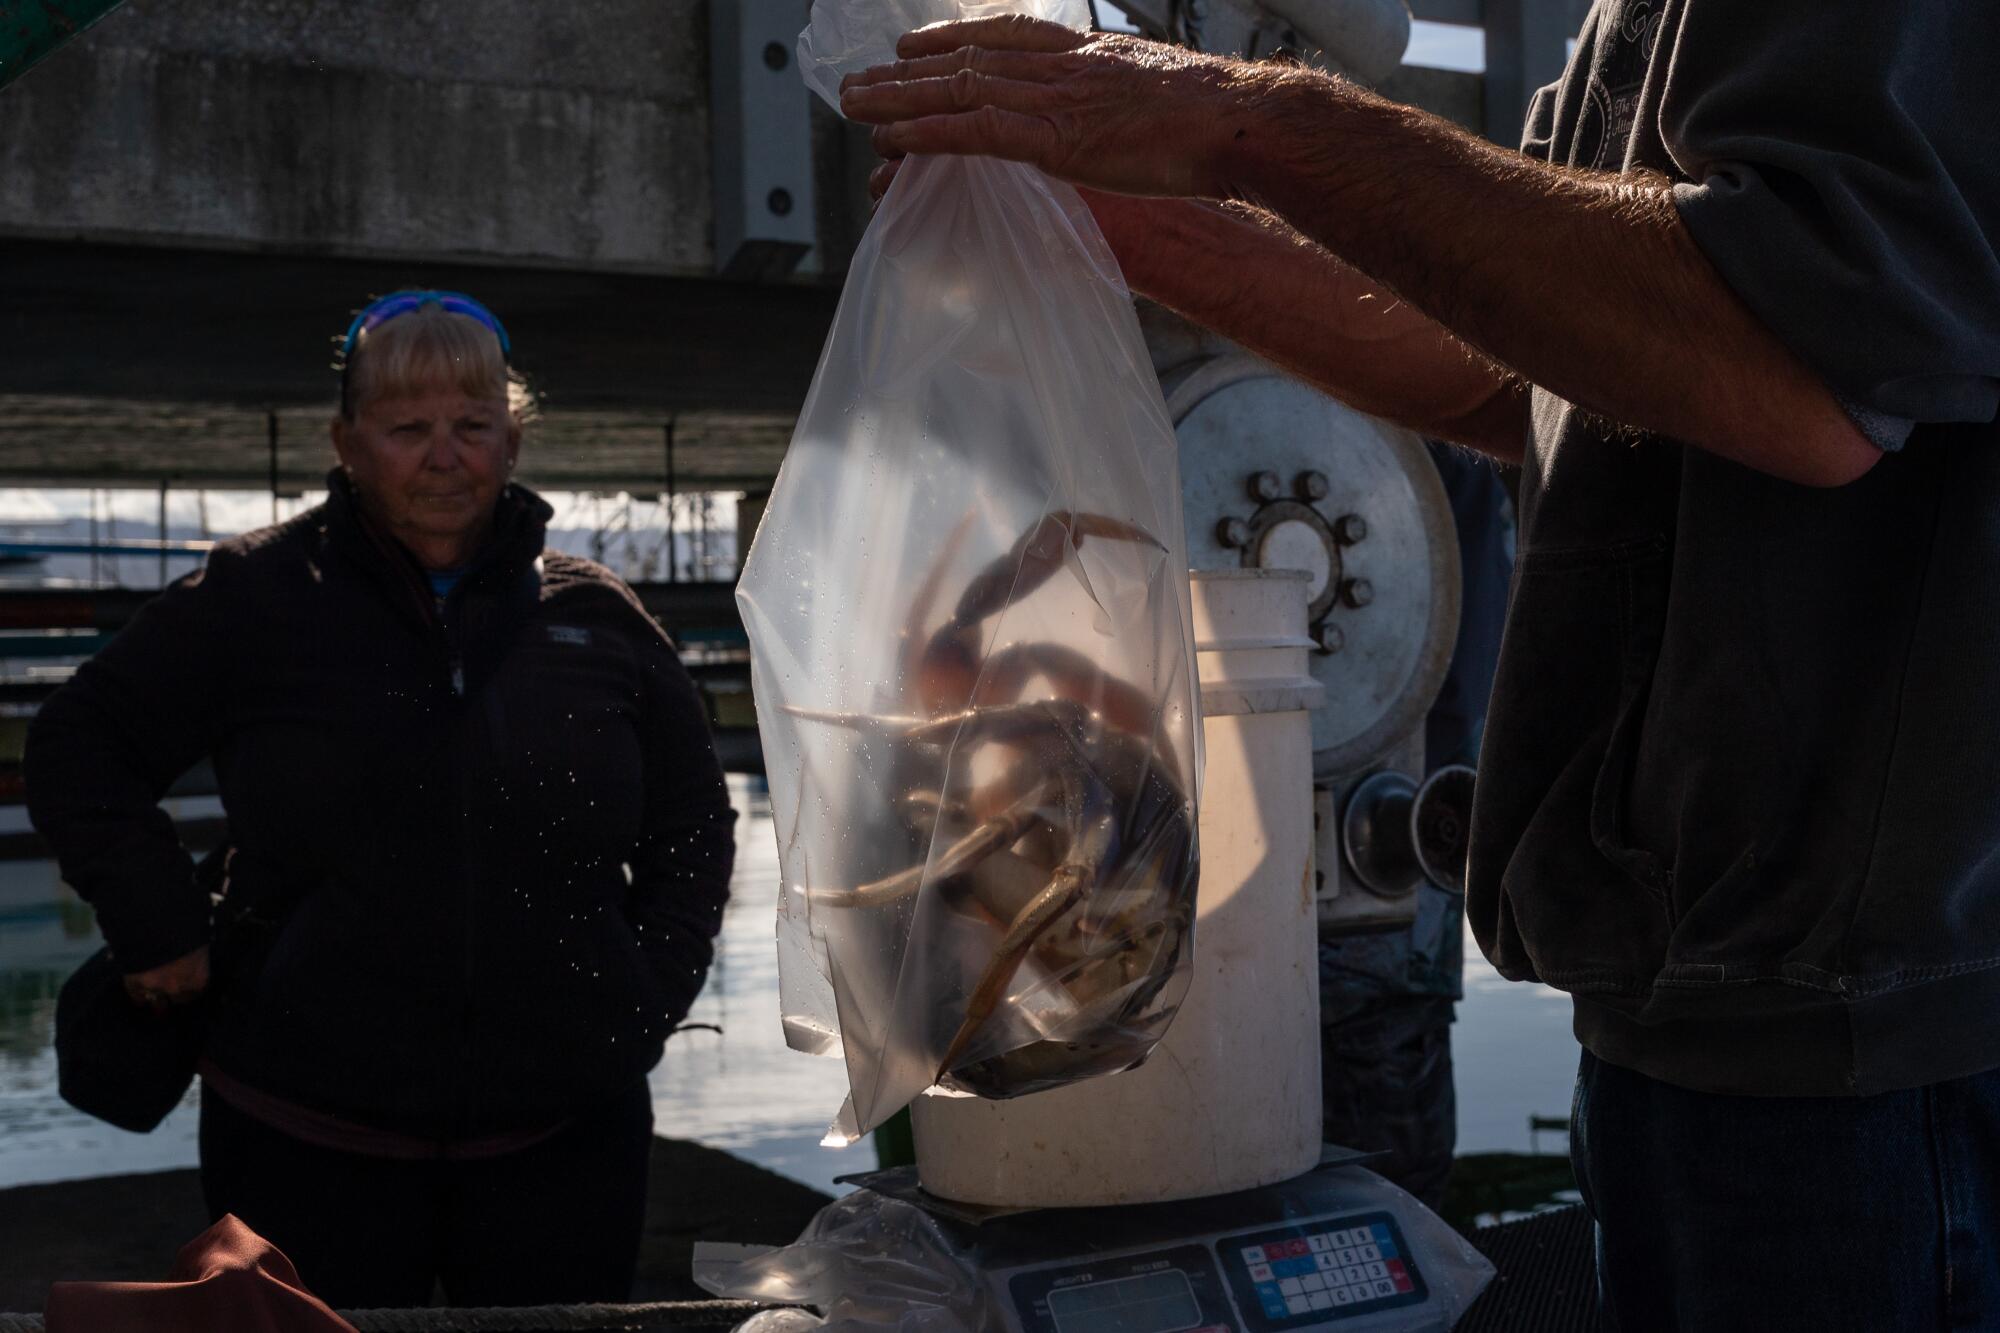 Commercial fisherman Robert Gieskens sells freshly caught Dungeness crab to customers.